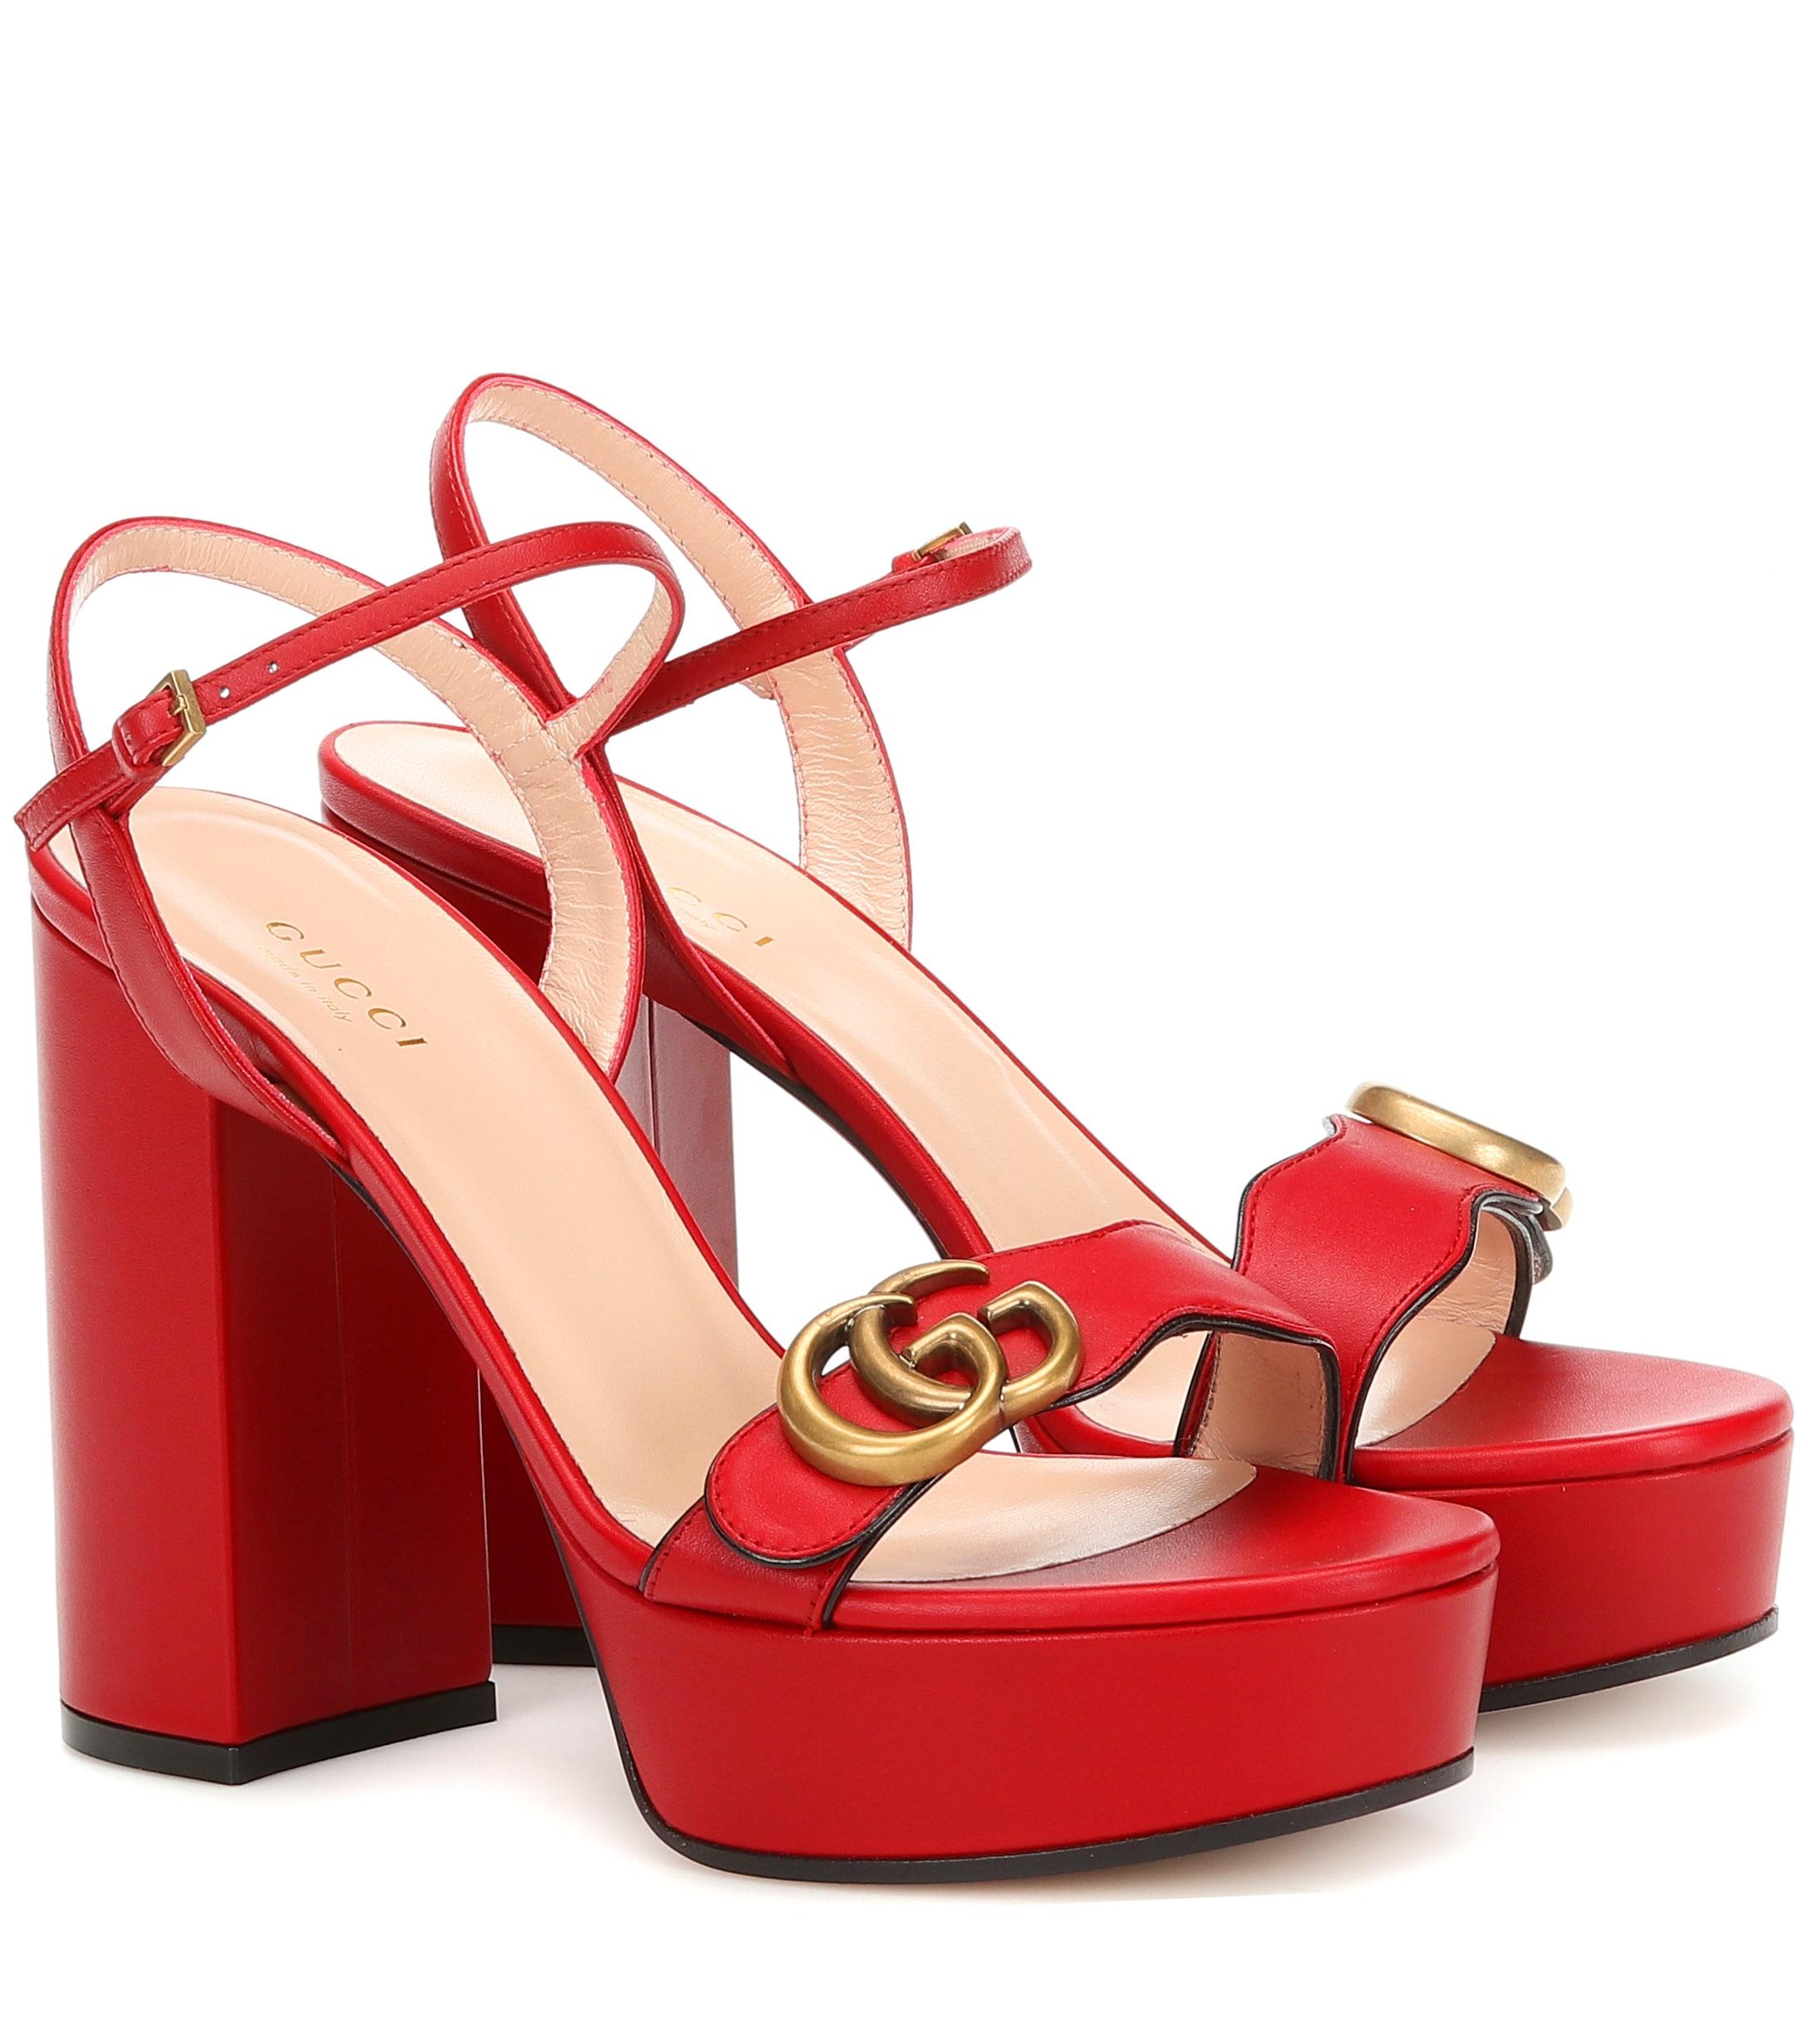 Gucci Marmont Leather Platform Sandals in Red - Lyst